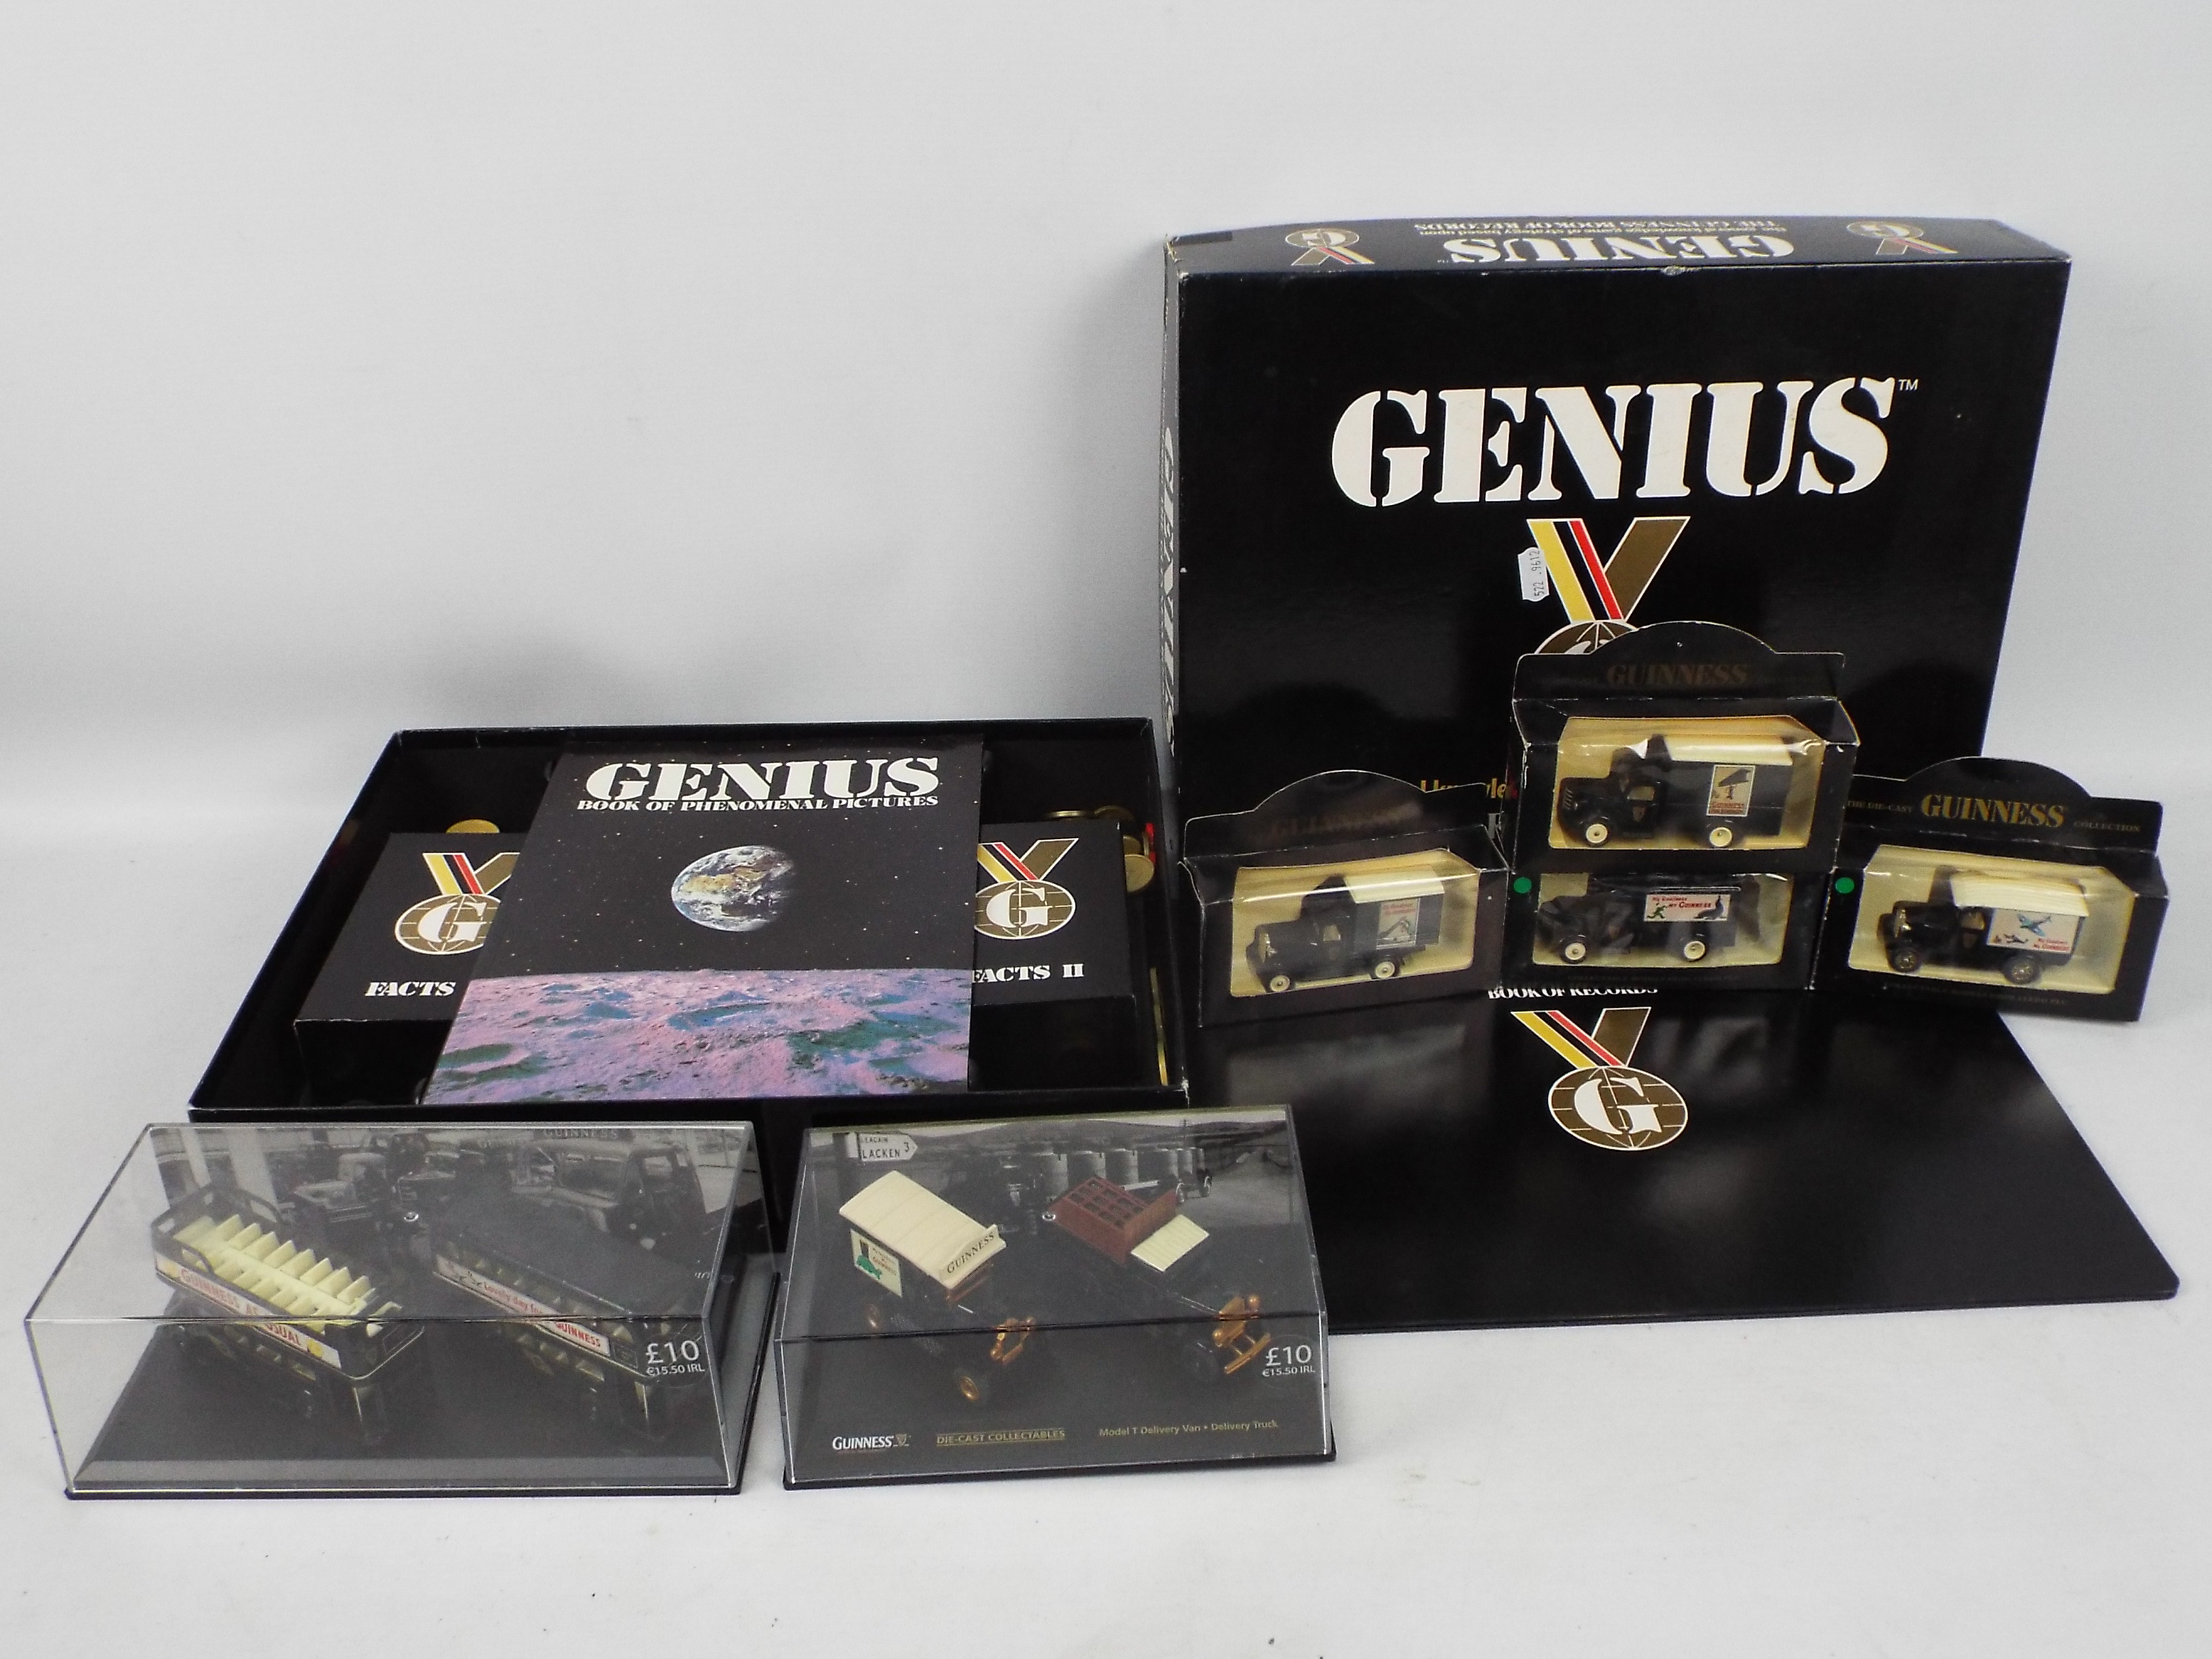 Guinness - A Guinness Genius board game